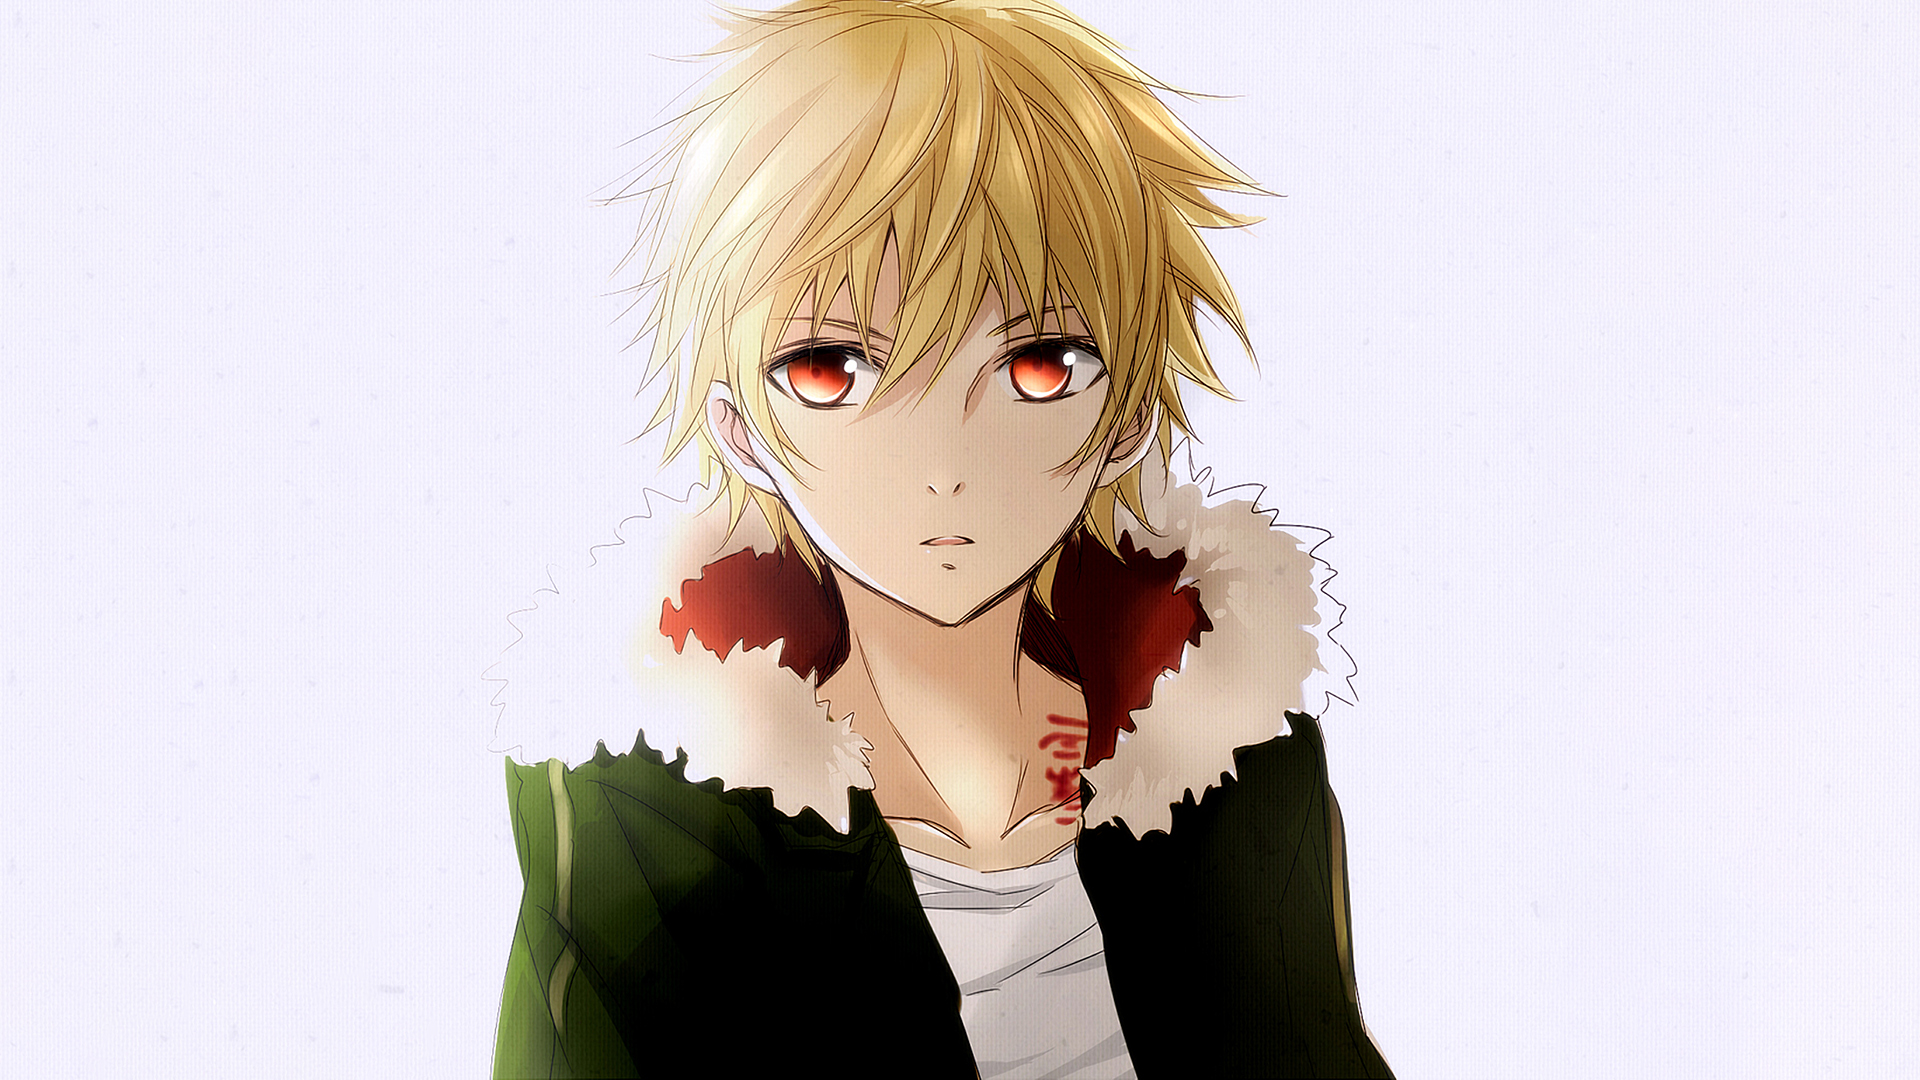 Anime Yukine And Noragami Image - Noragami Yukine PNG Image With  Transparent Background | TOPpng